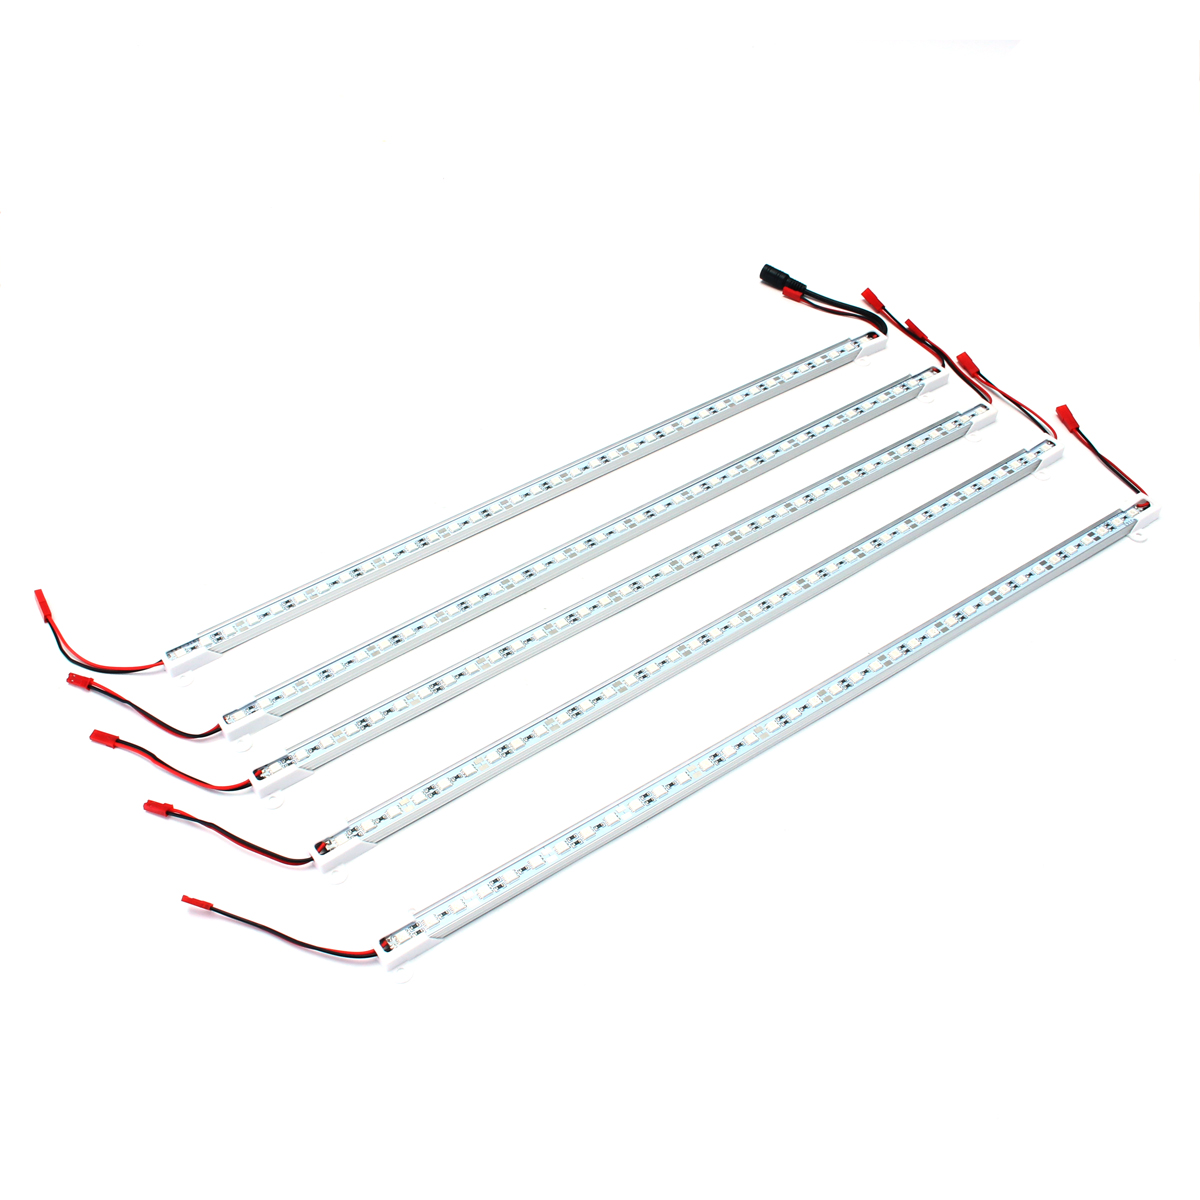 5PCS-50CM-SMD5050-RedBlue-51-Grow-Plant-LED-Strip-Light-with-Connector-for-Greenhouse-DC12V-1285483-2